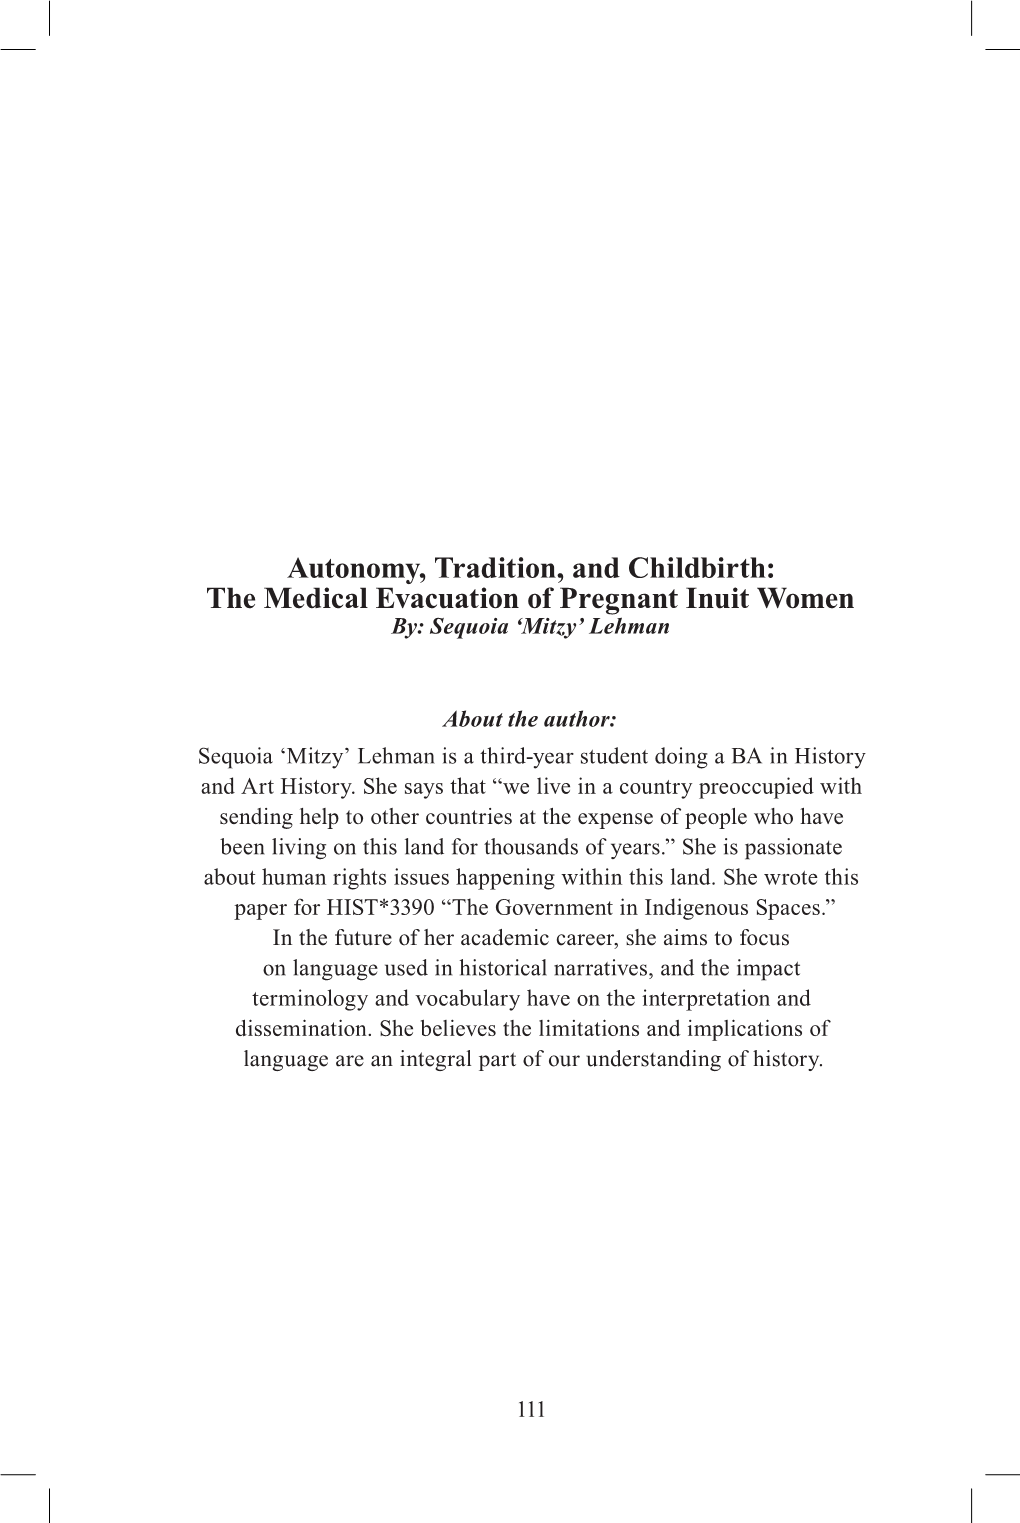 The Medical Evacuation of Pregnant Inuit Women By: Sequoia ‘Mitzy’ Lehman